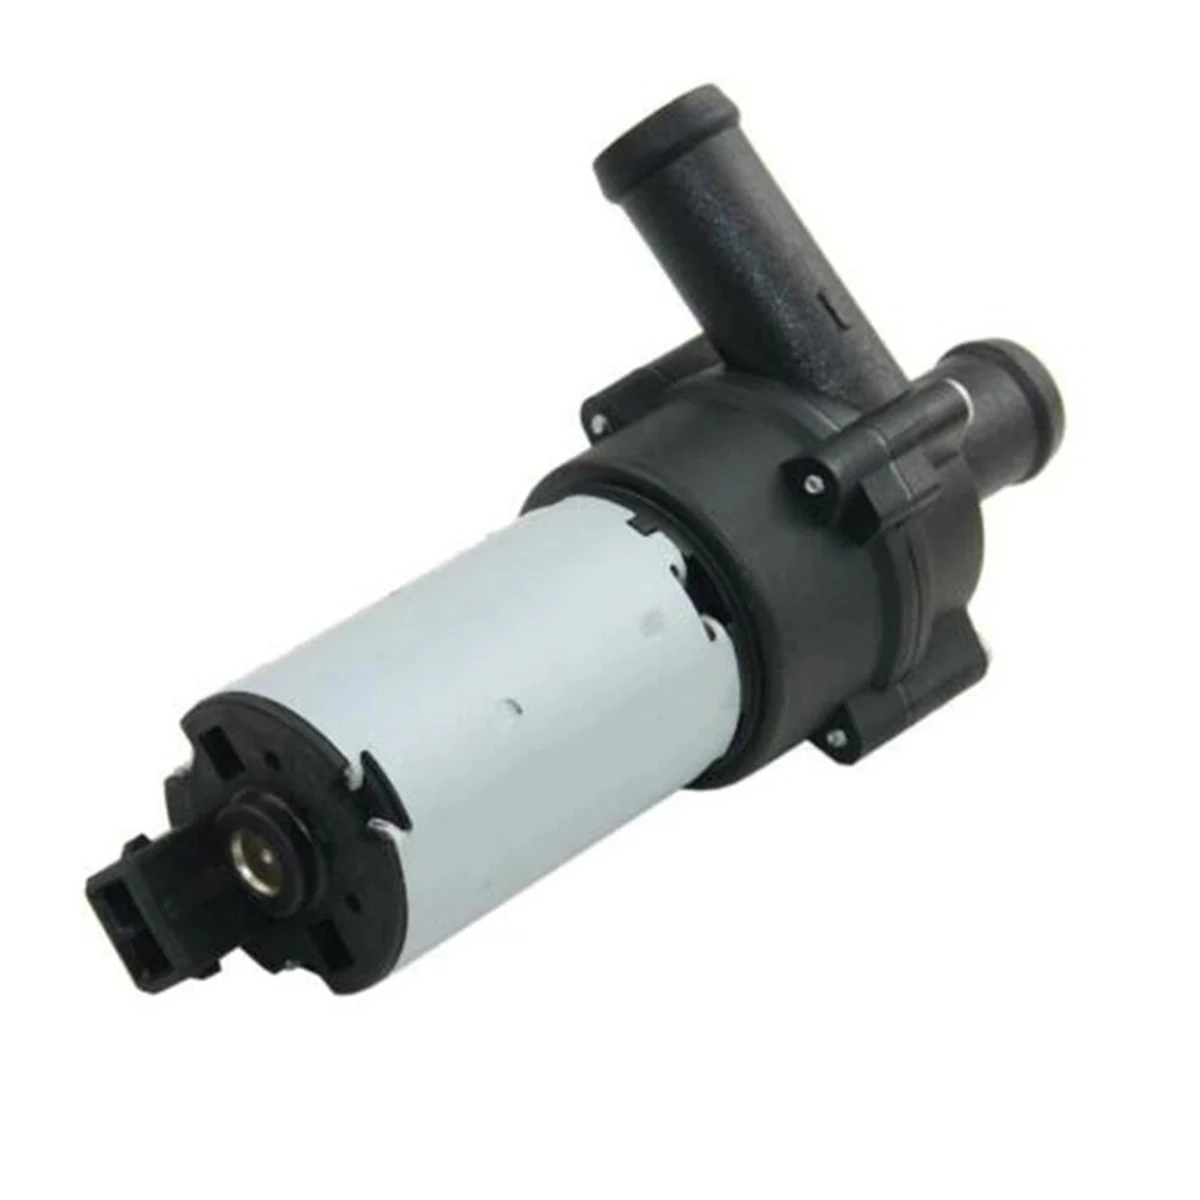 

90509271 Auxiliary Water Pump Additional Water Pump Automobile for A6 2000-2002 2.7 V6 Corrado EuroVan